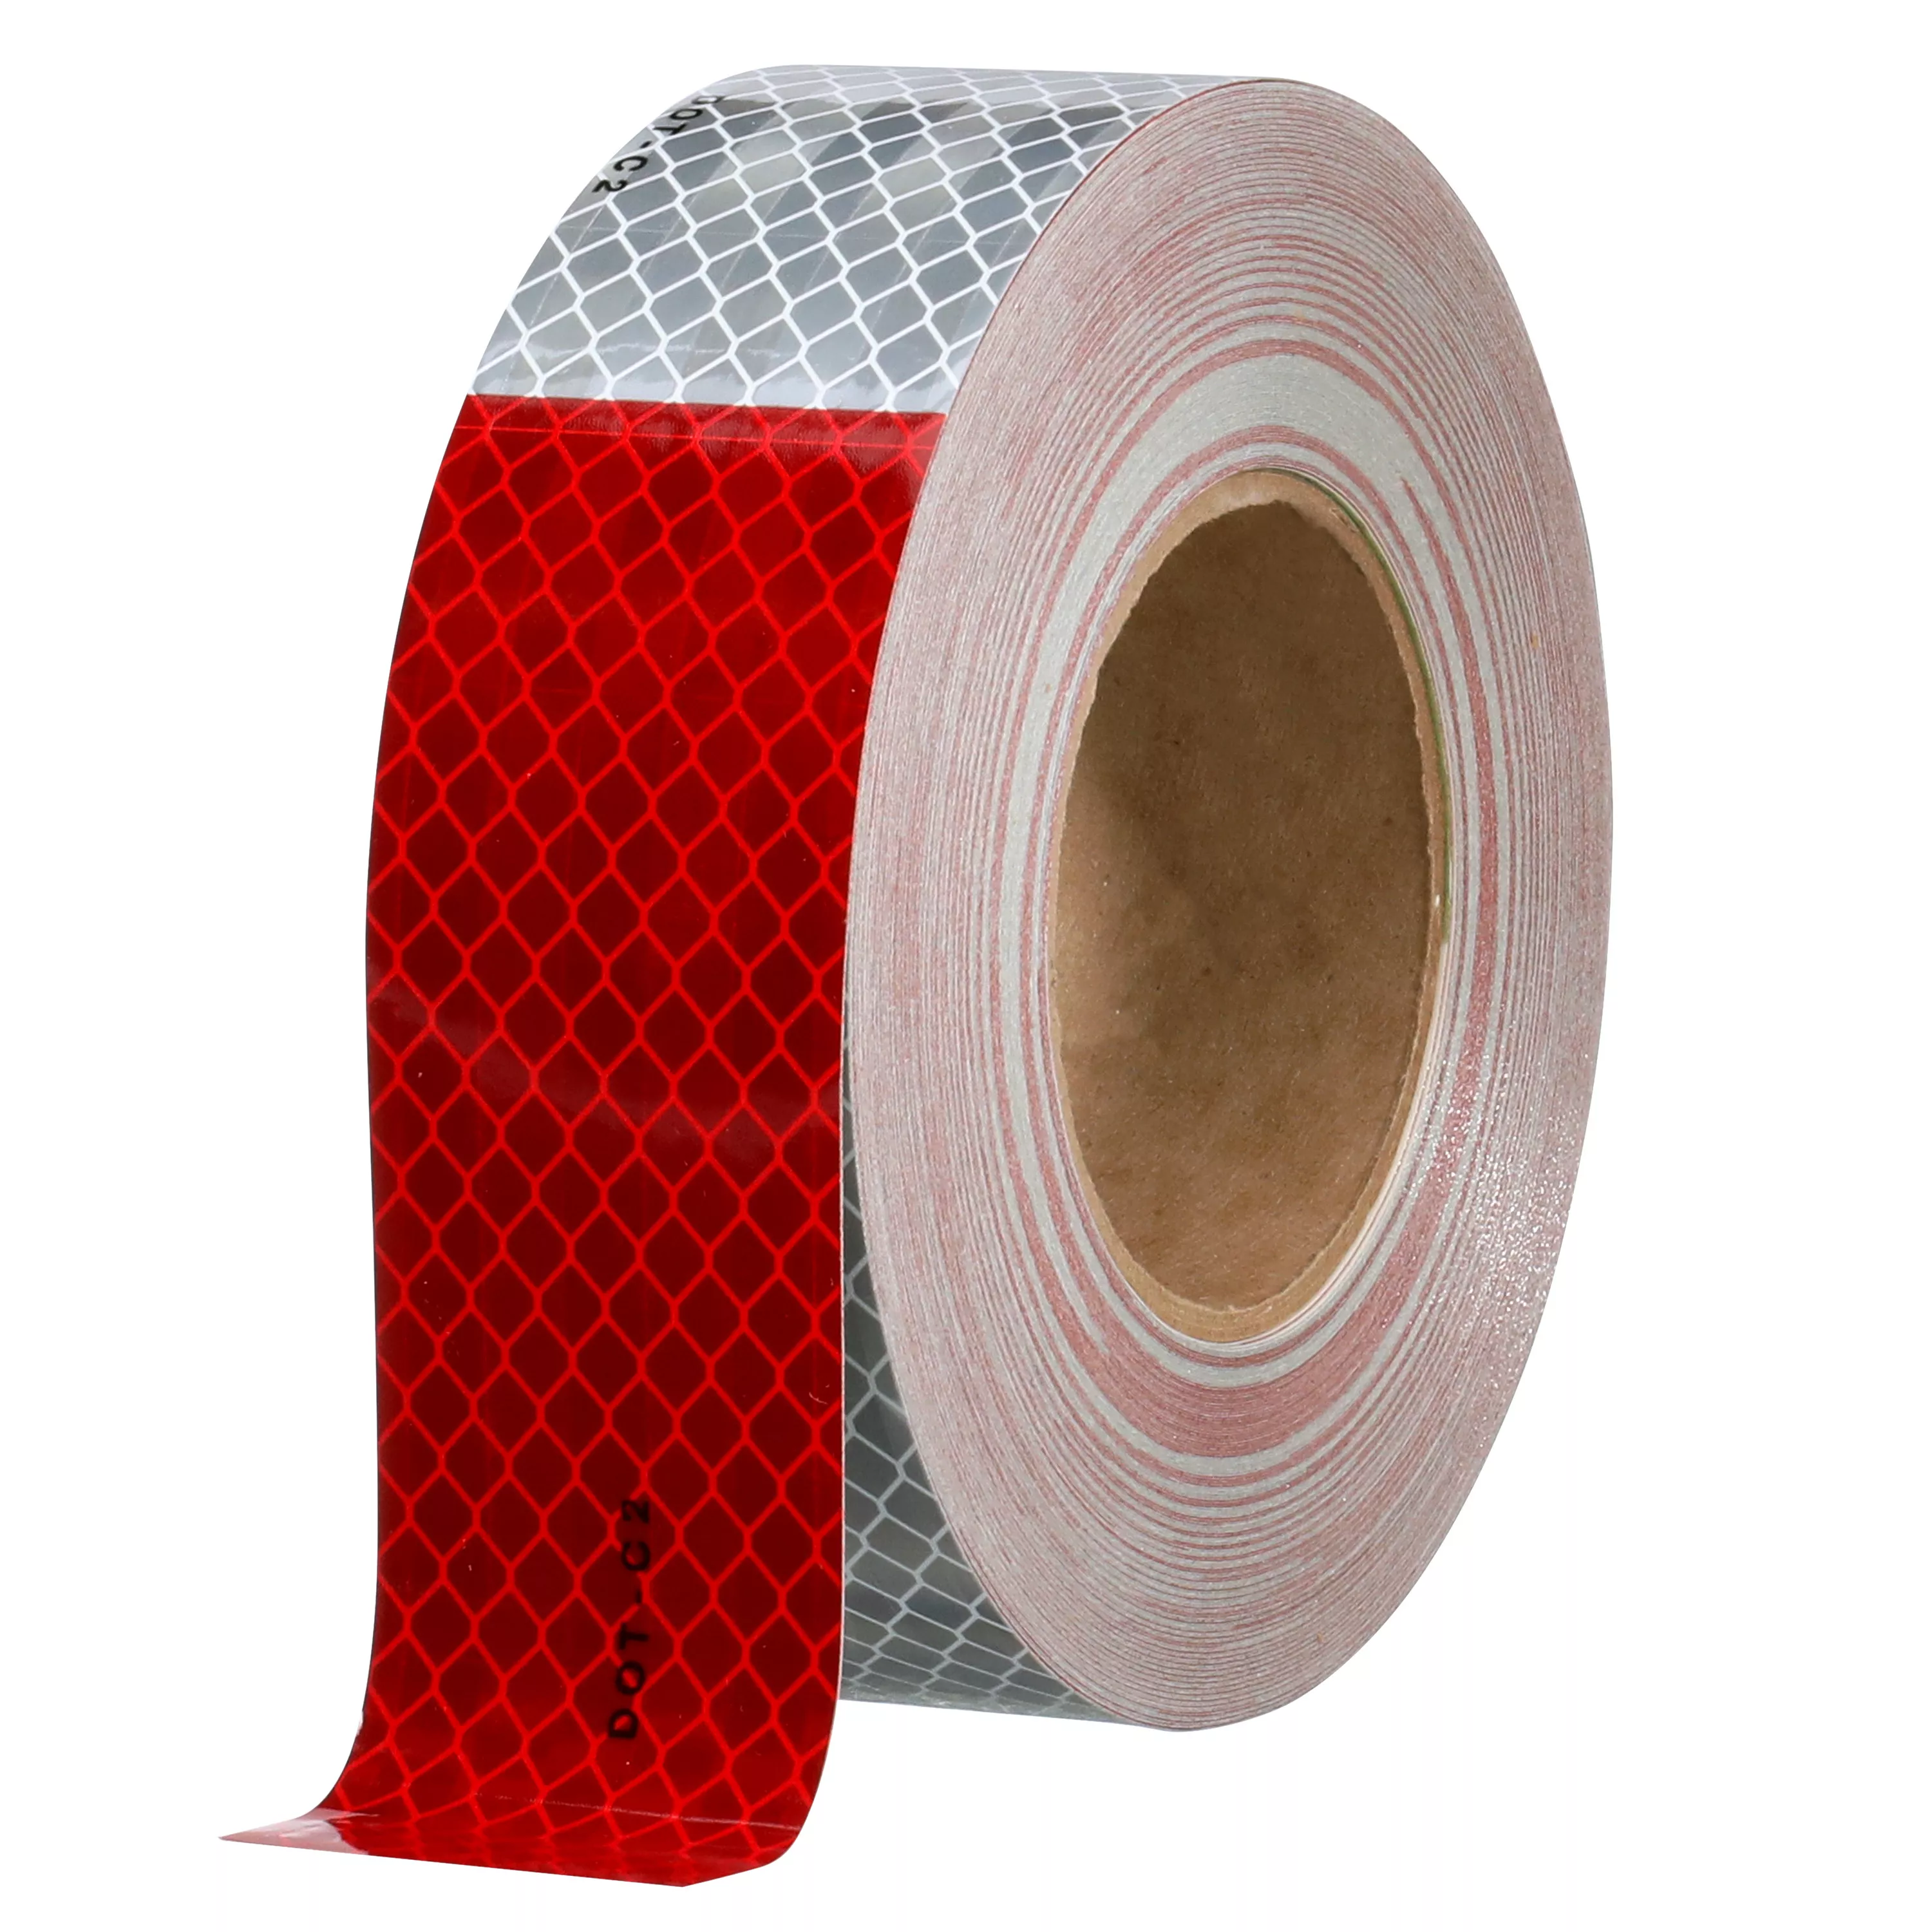 3M™ Flexible Prismatic Conspicuity Markings 913-326, Red/White, DOT, 2
in x 50 yd, kiss-cut every 12 in, 1/Box, 10/Case